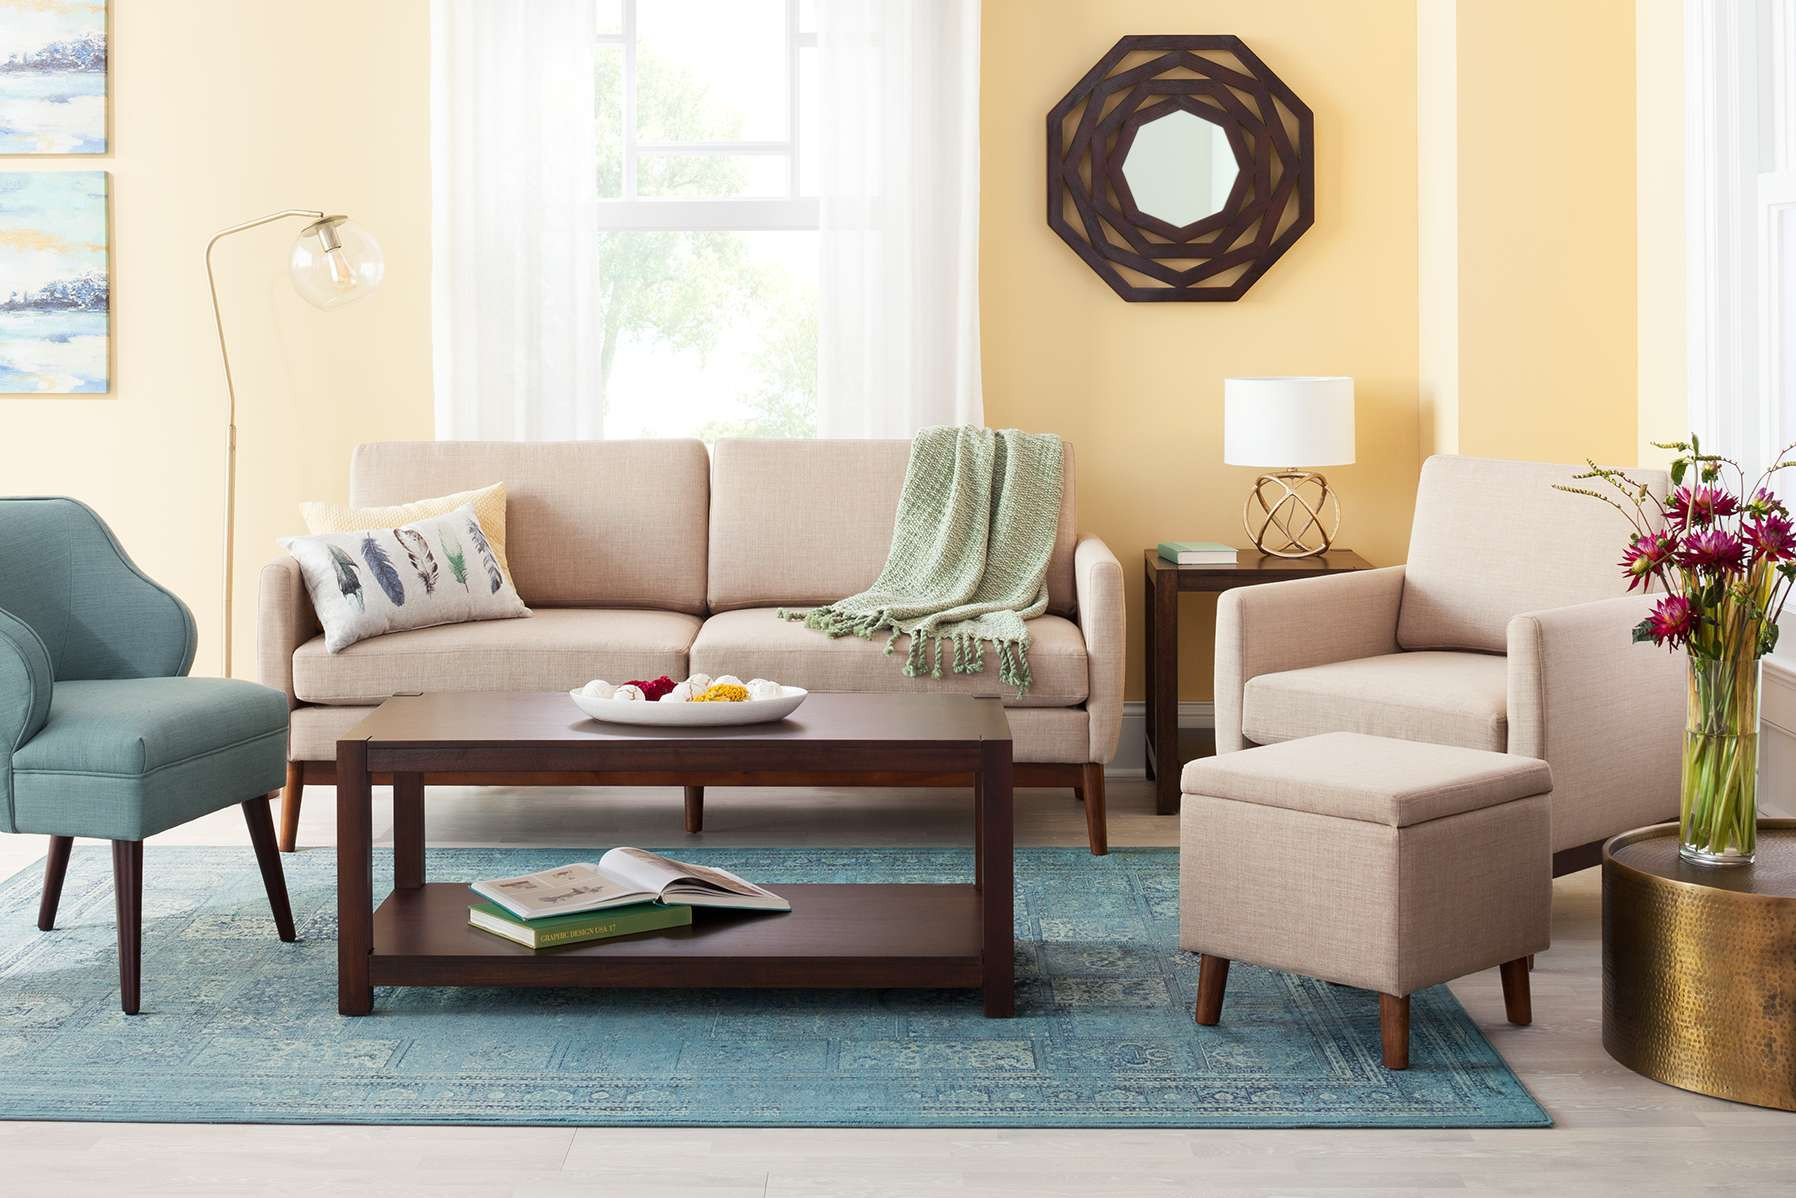 Target Living Room Chairs
 living room furniture Tar